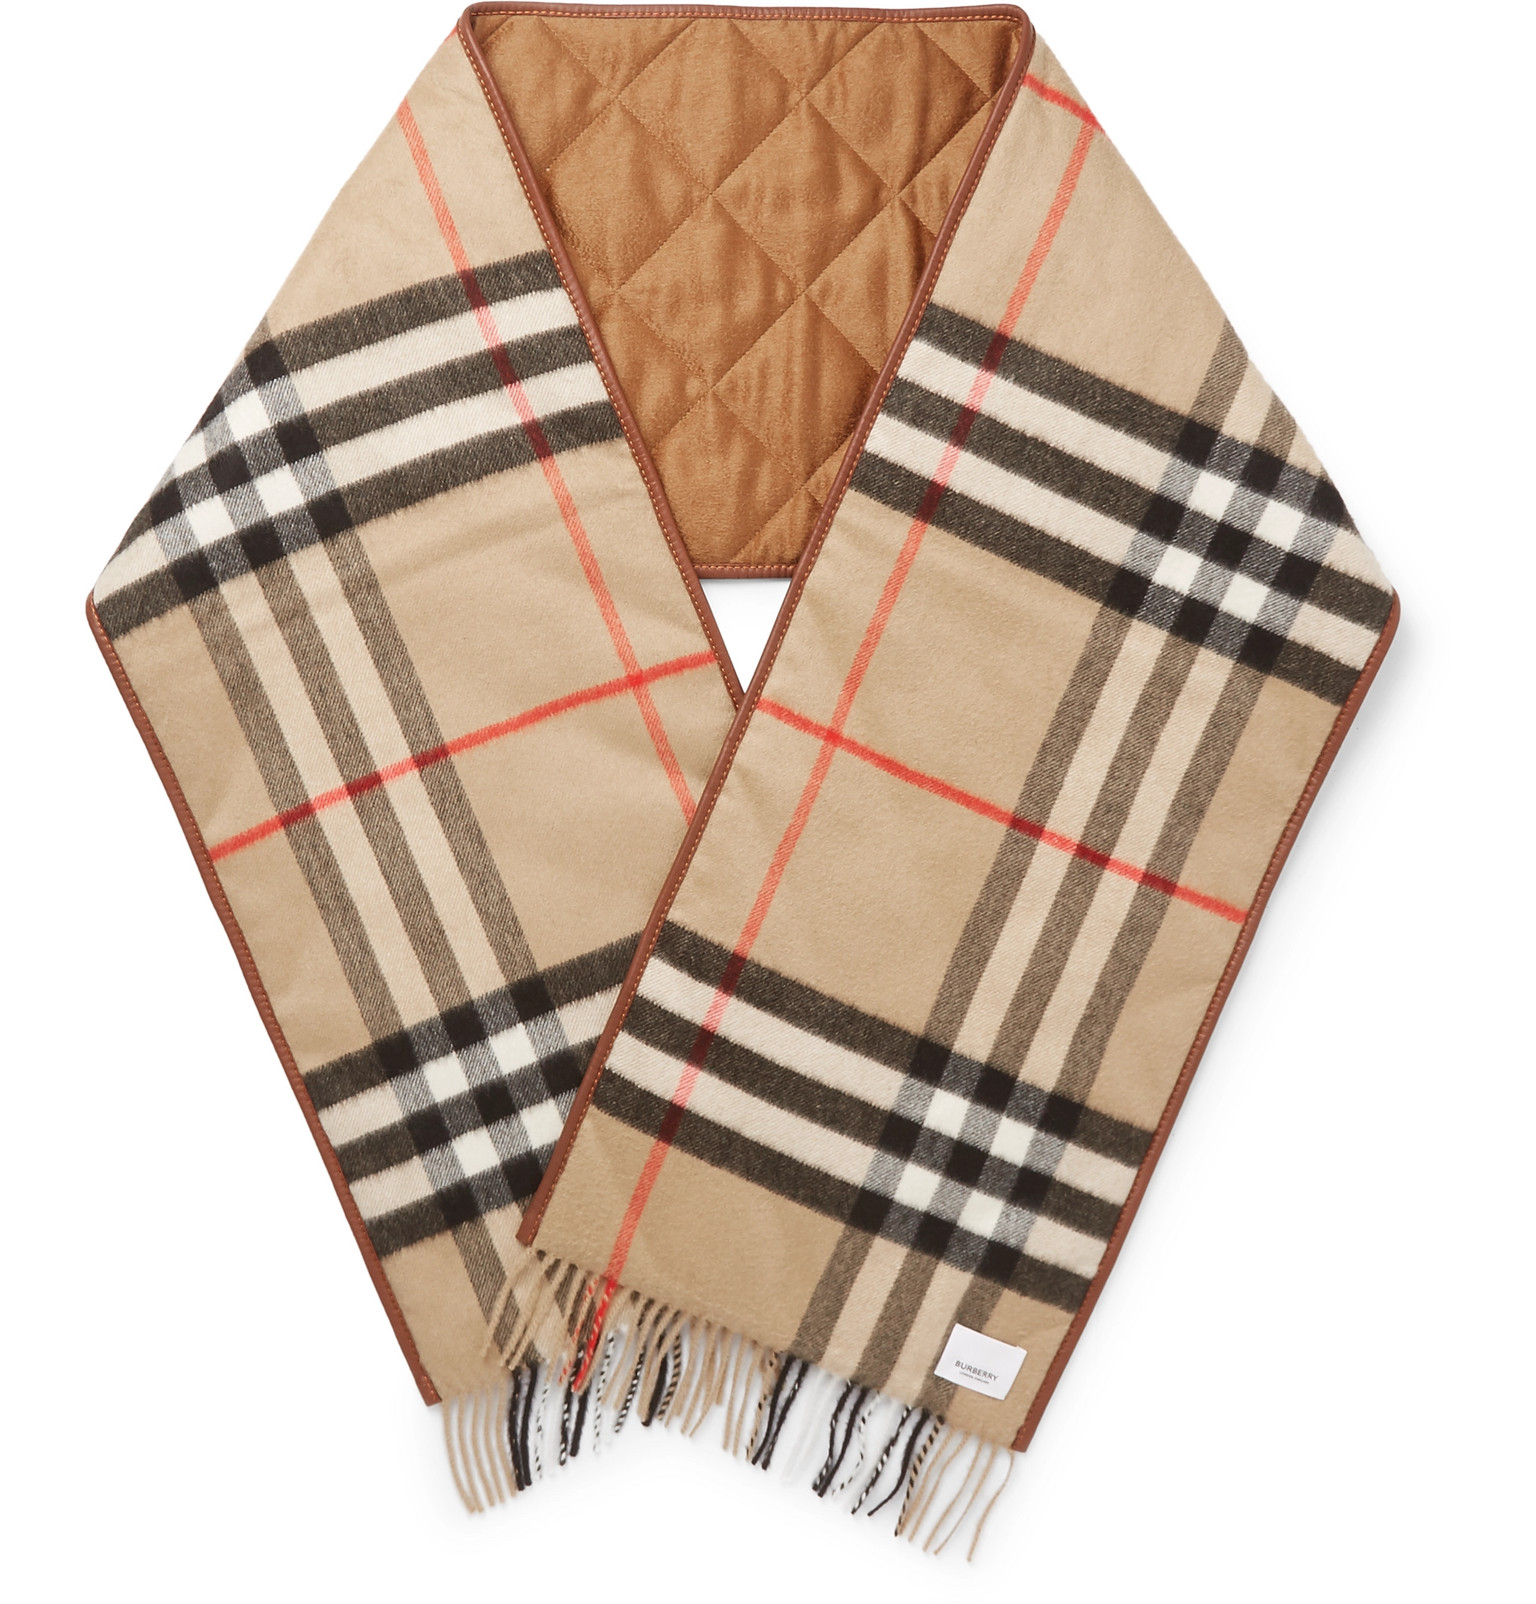 Burberry - Reversible Leather-Trimmed Quilted Fringed Checked Cashmere ...